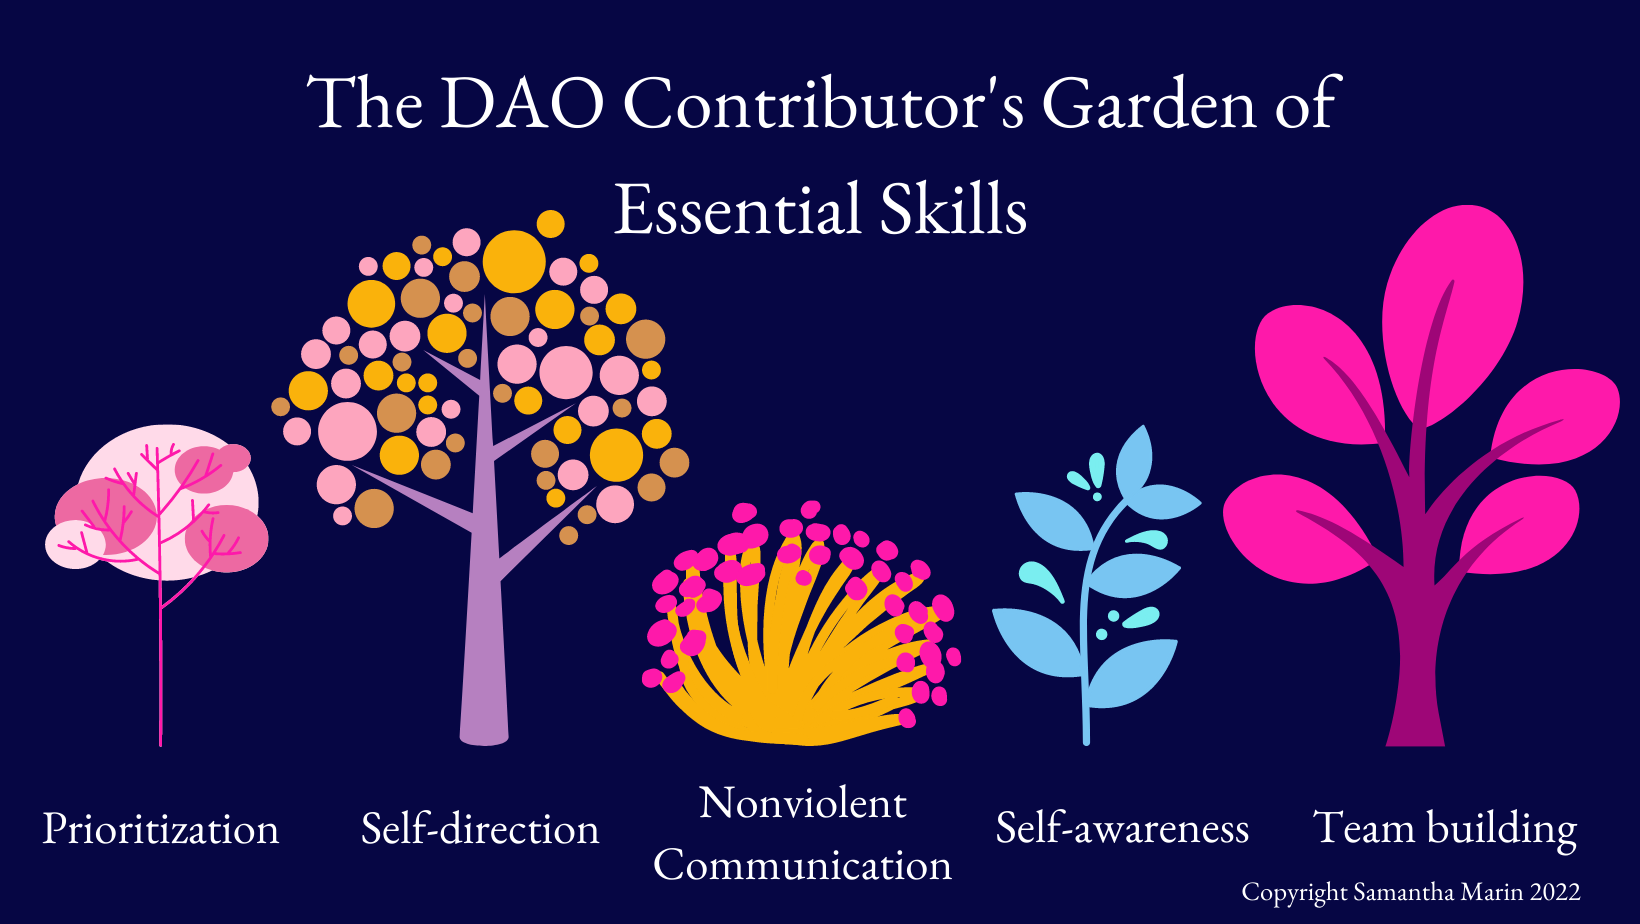 The skill garden takes a lot of watering and care, but once it's grown, it bears fruit for years.